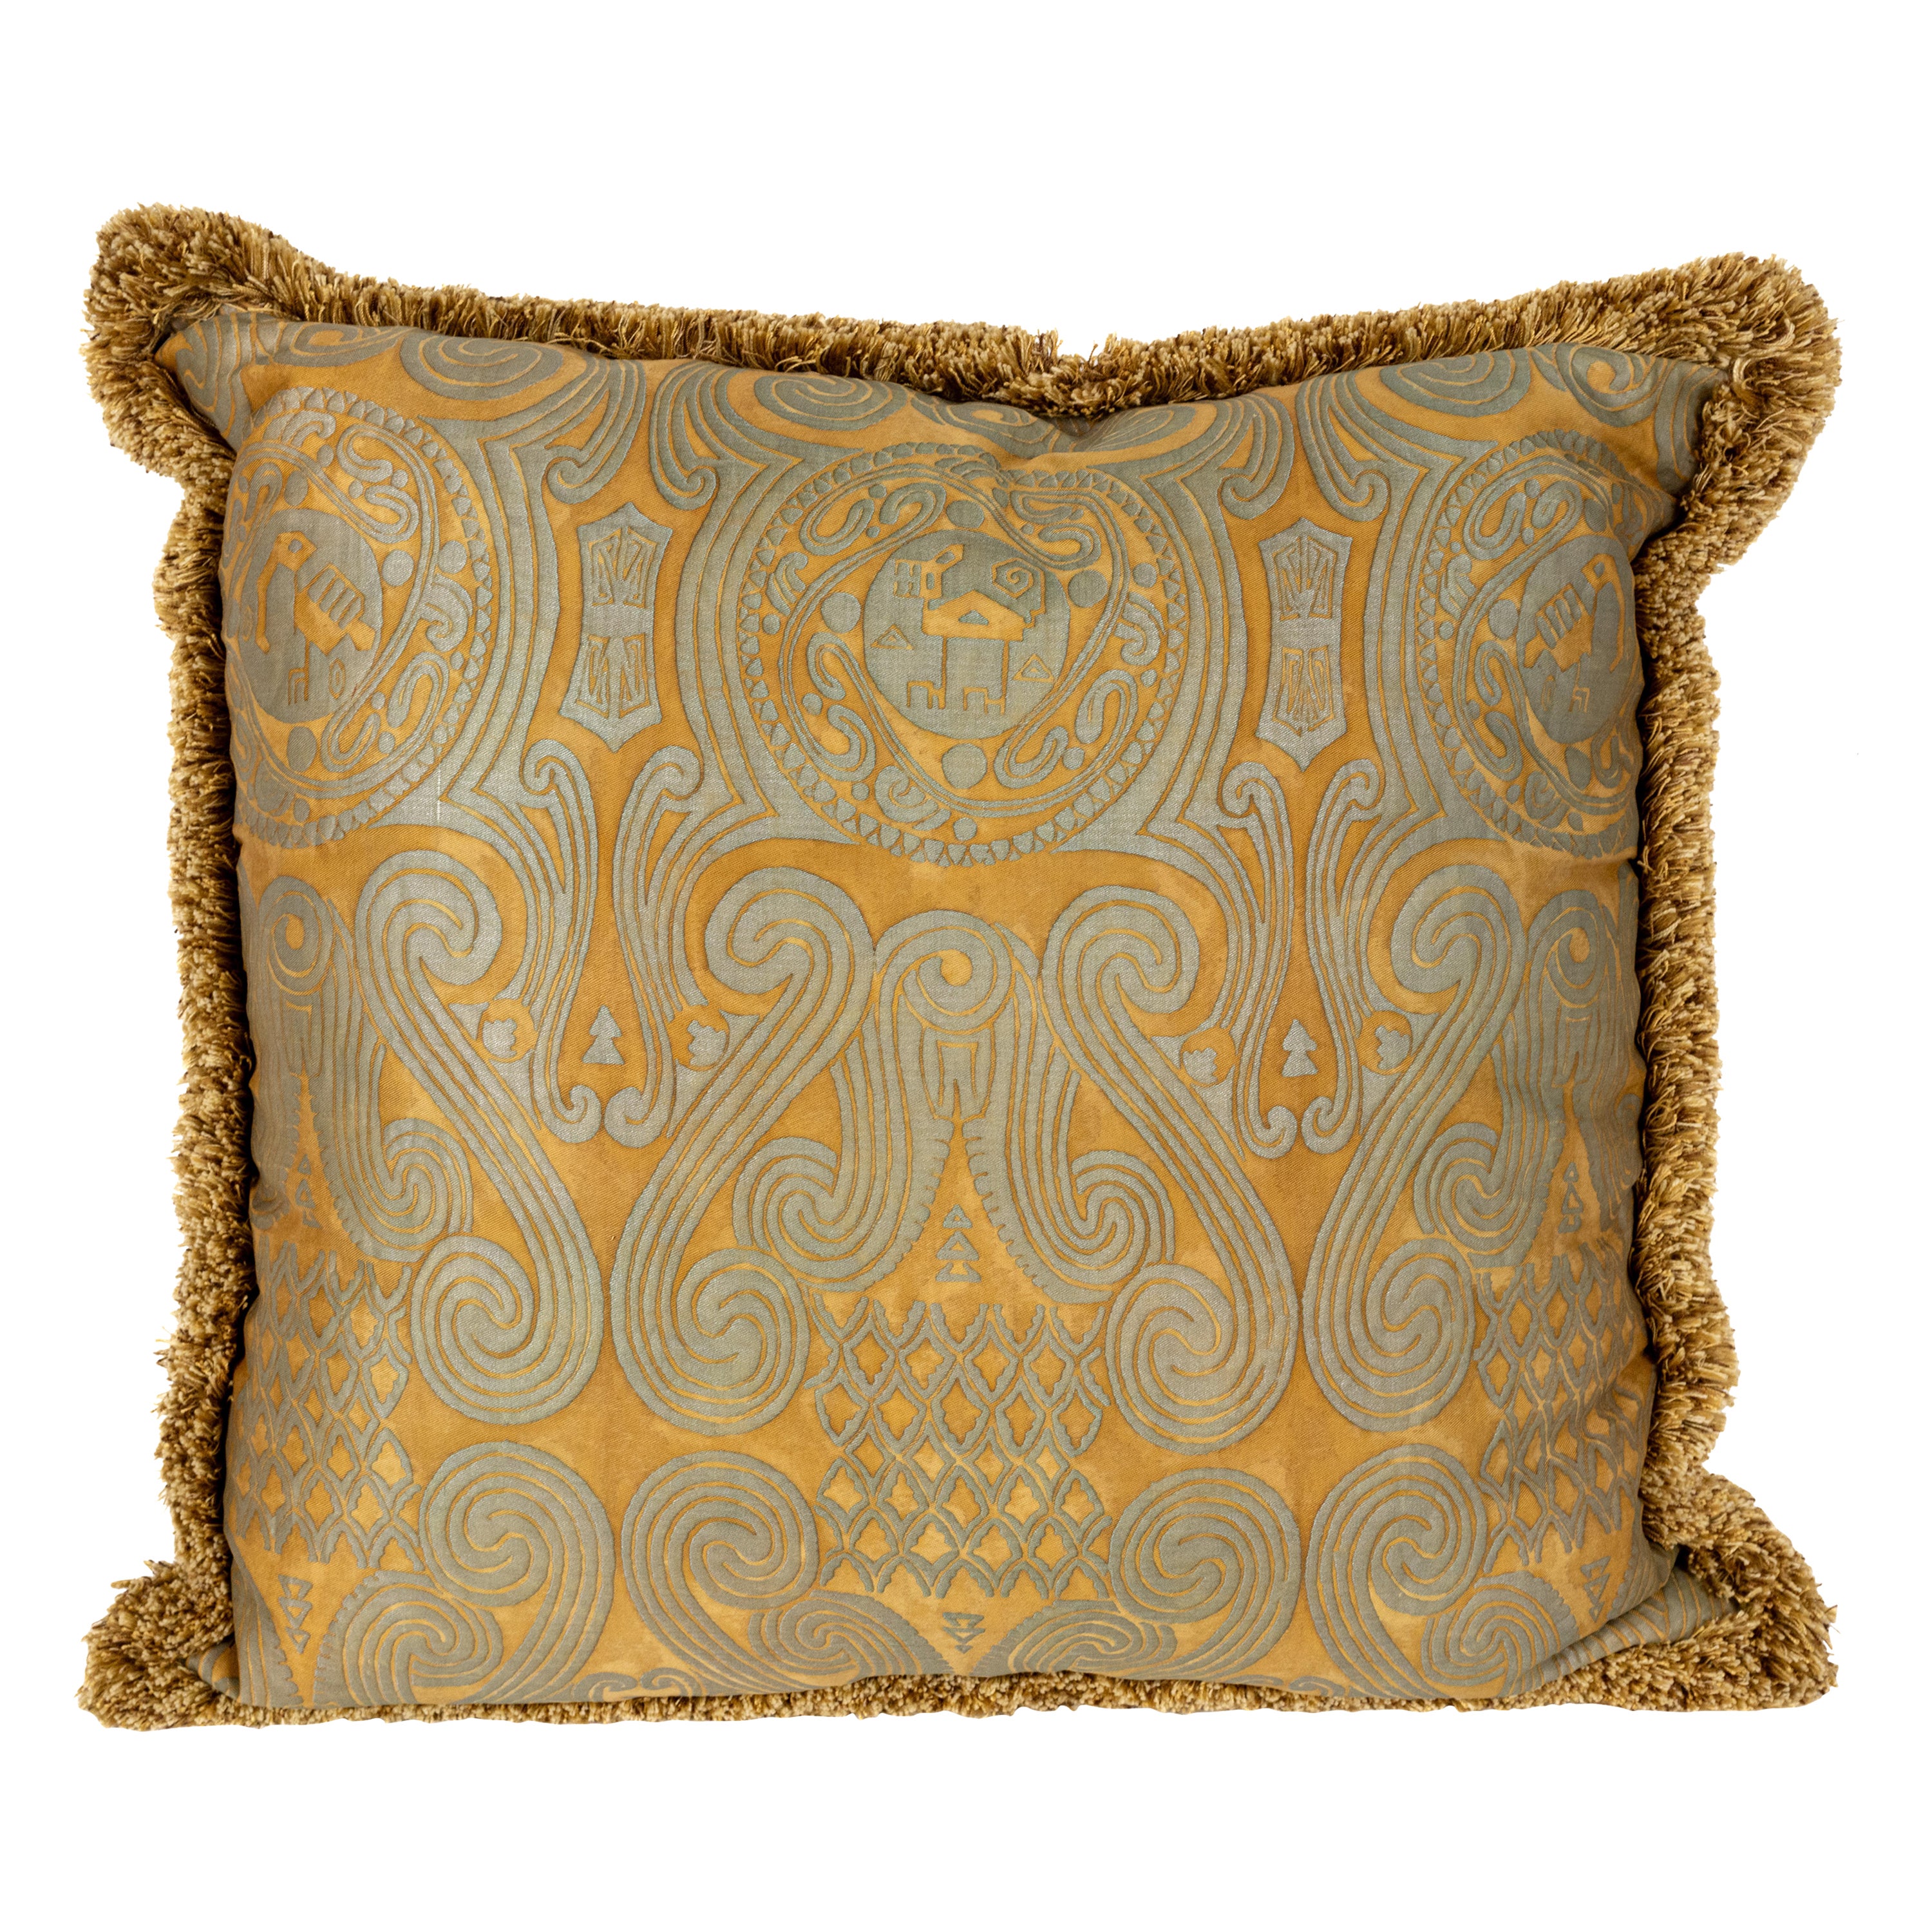 A Fortuny Cushion in the Peruviano Pattern with Brush Fringe